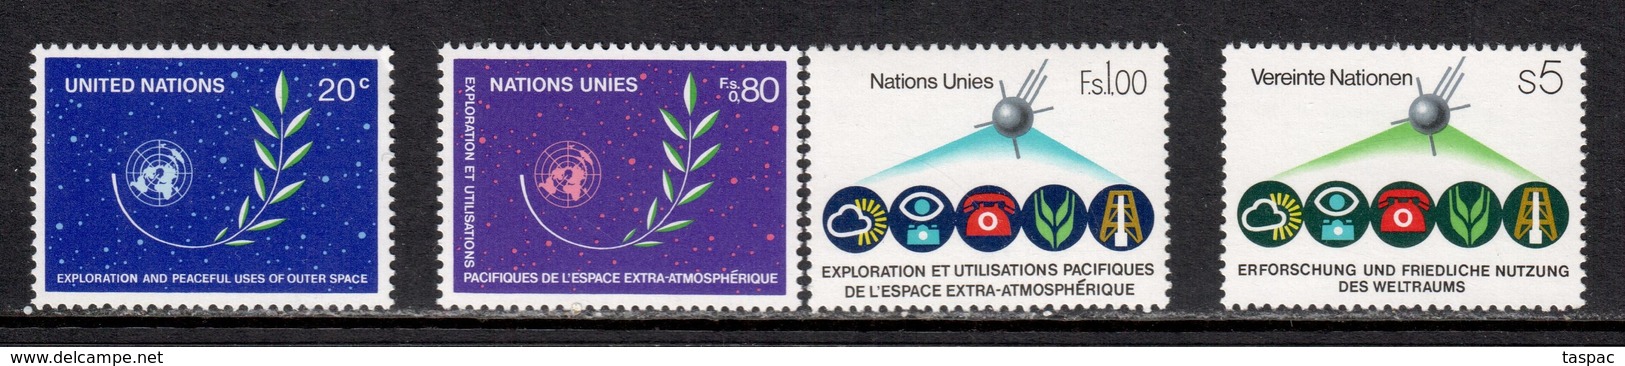 United Nations 1982 New York Mi# 396; Geneva 107-108; Vienna 26 ** MNH - Exploration And Peaceful Uses Of Outer Space - Amérique Du Nord